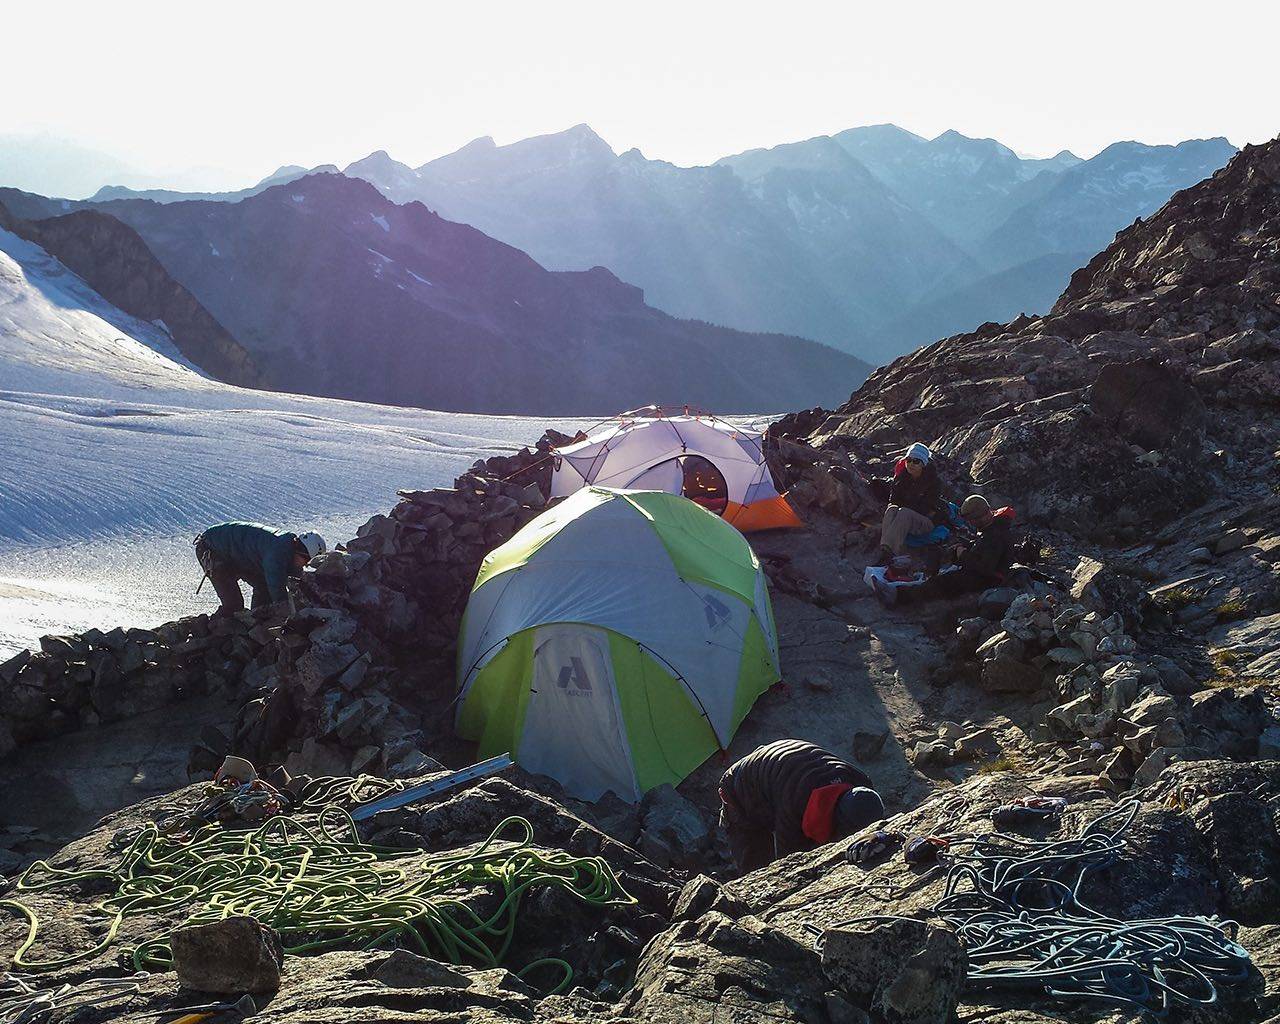 Camp setup during mountaineering trip with glacier in background